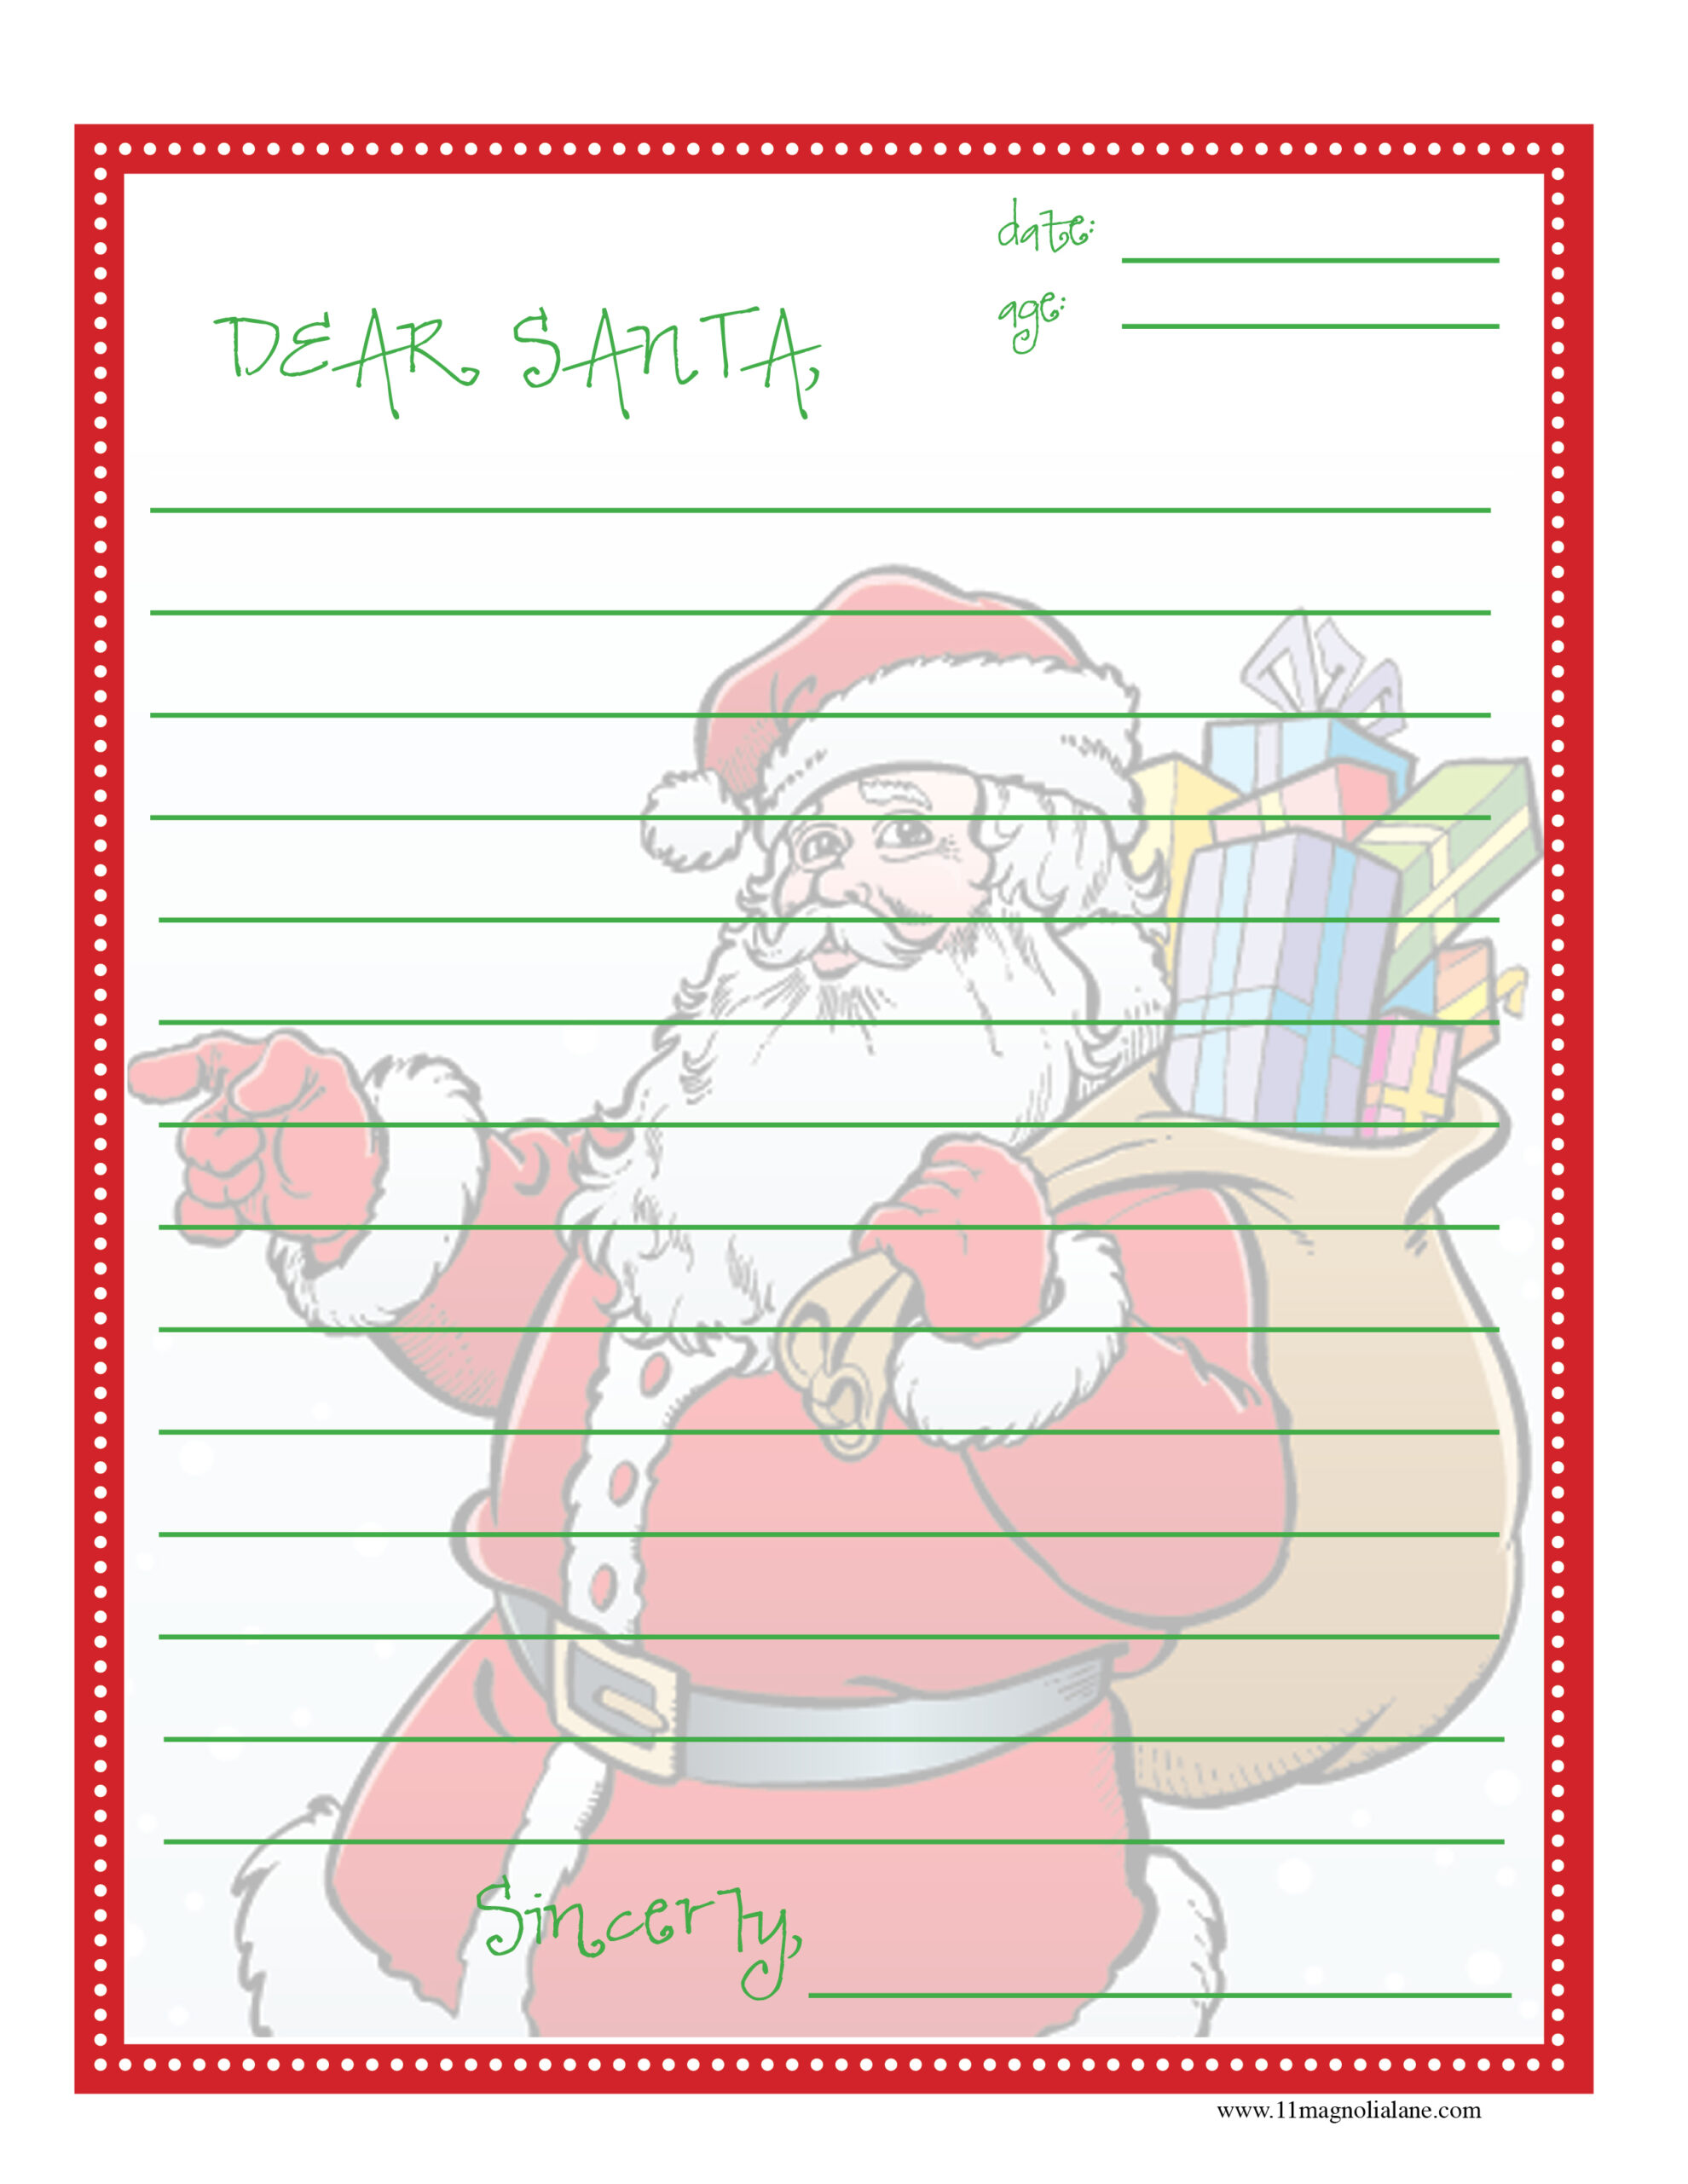 20-free-letter-to-santa-templates-for-kids-to-write-wishes